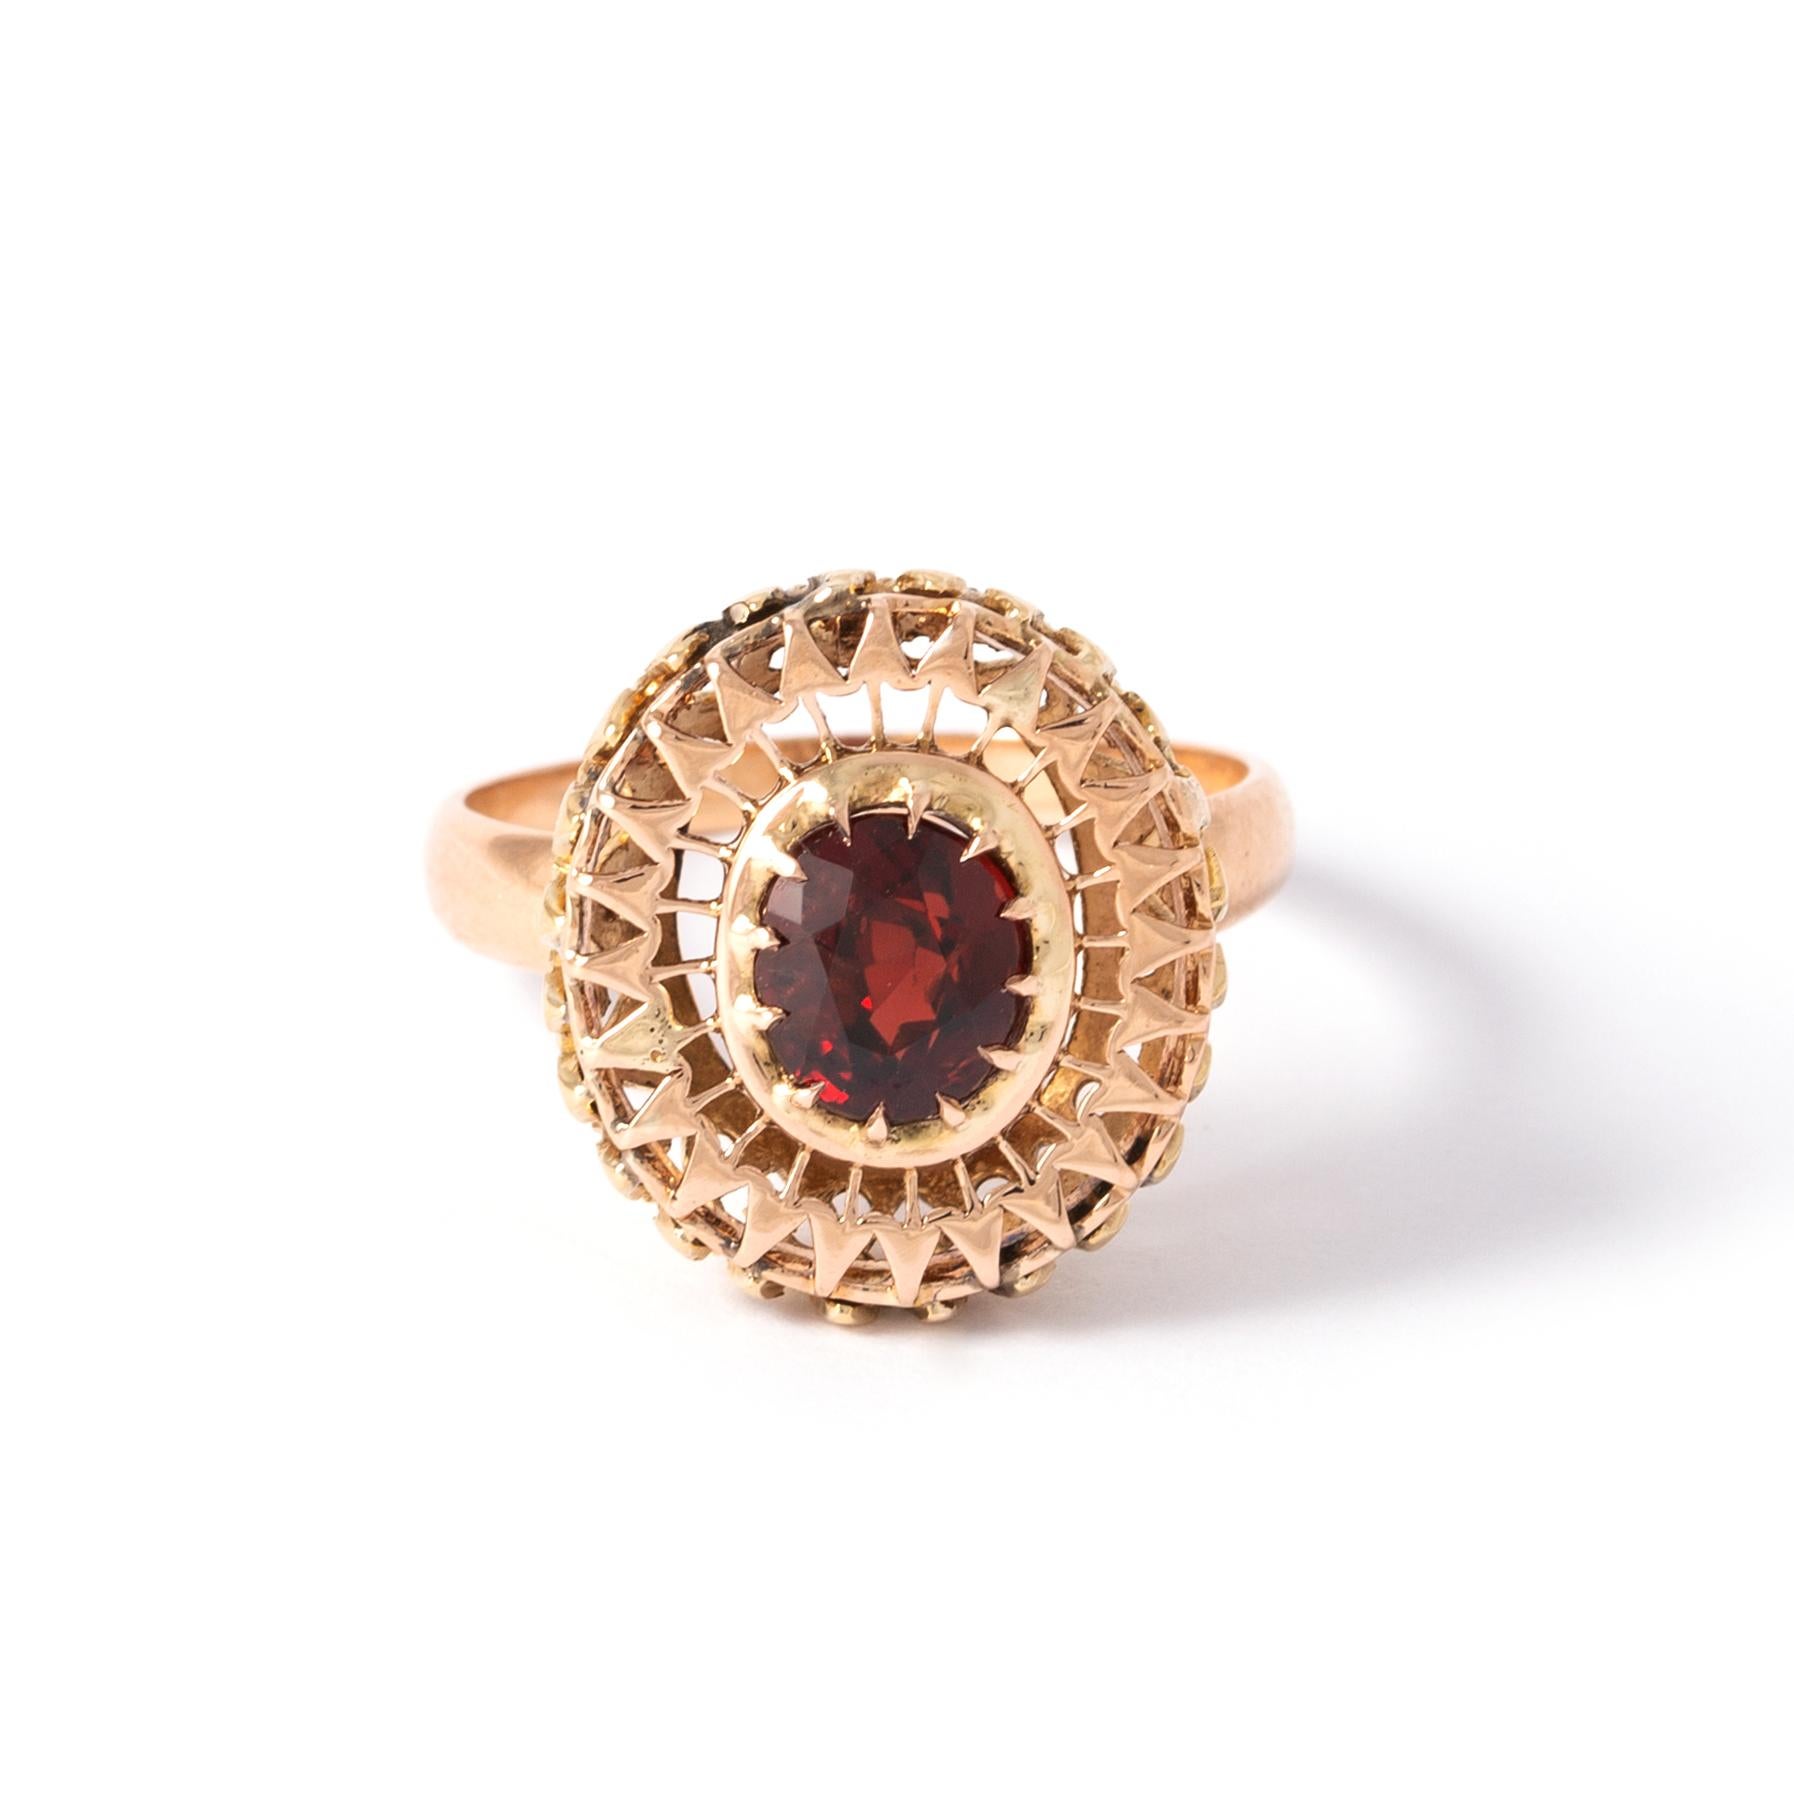 14K yellow gold ring centered with a spinel (treated) weighing approximately 1.70 carats in oval cut.
Finger size: 56.5.
Gross weight: 4.70g.